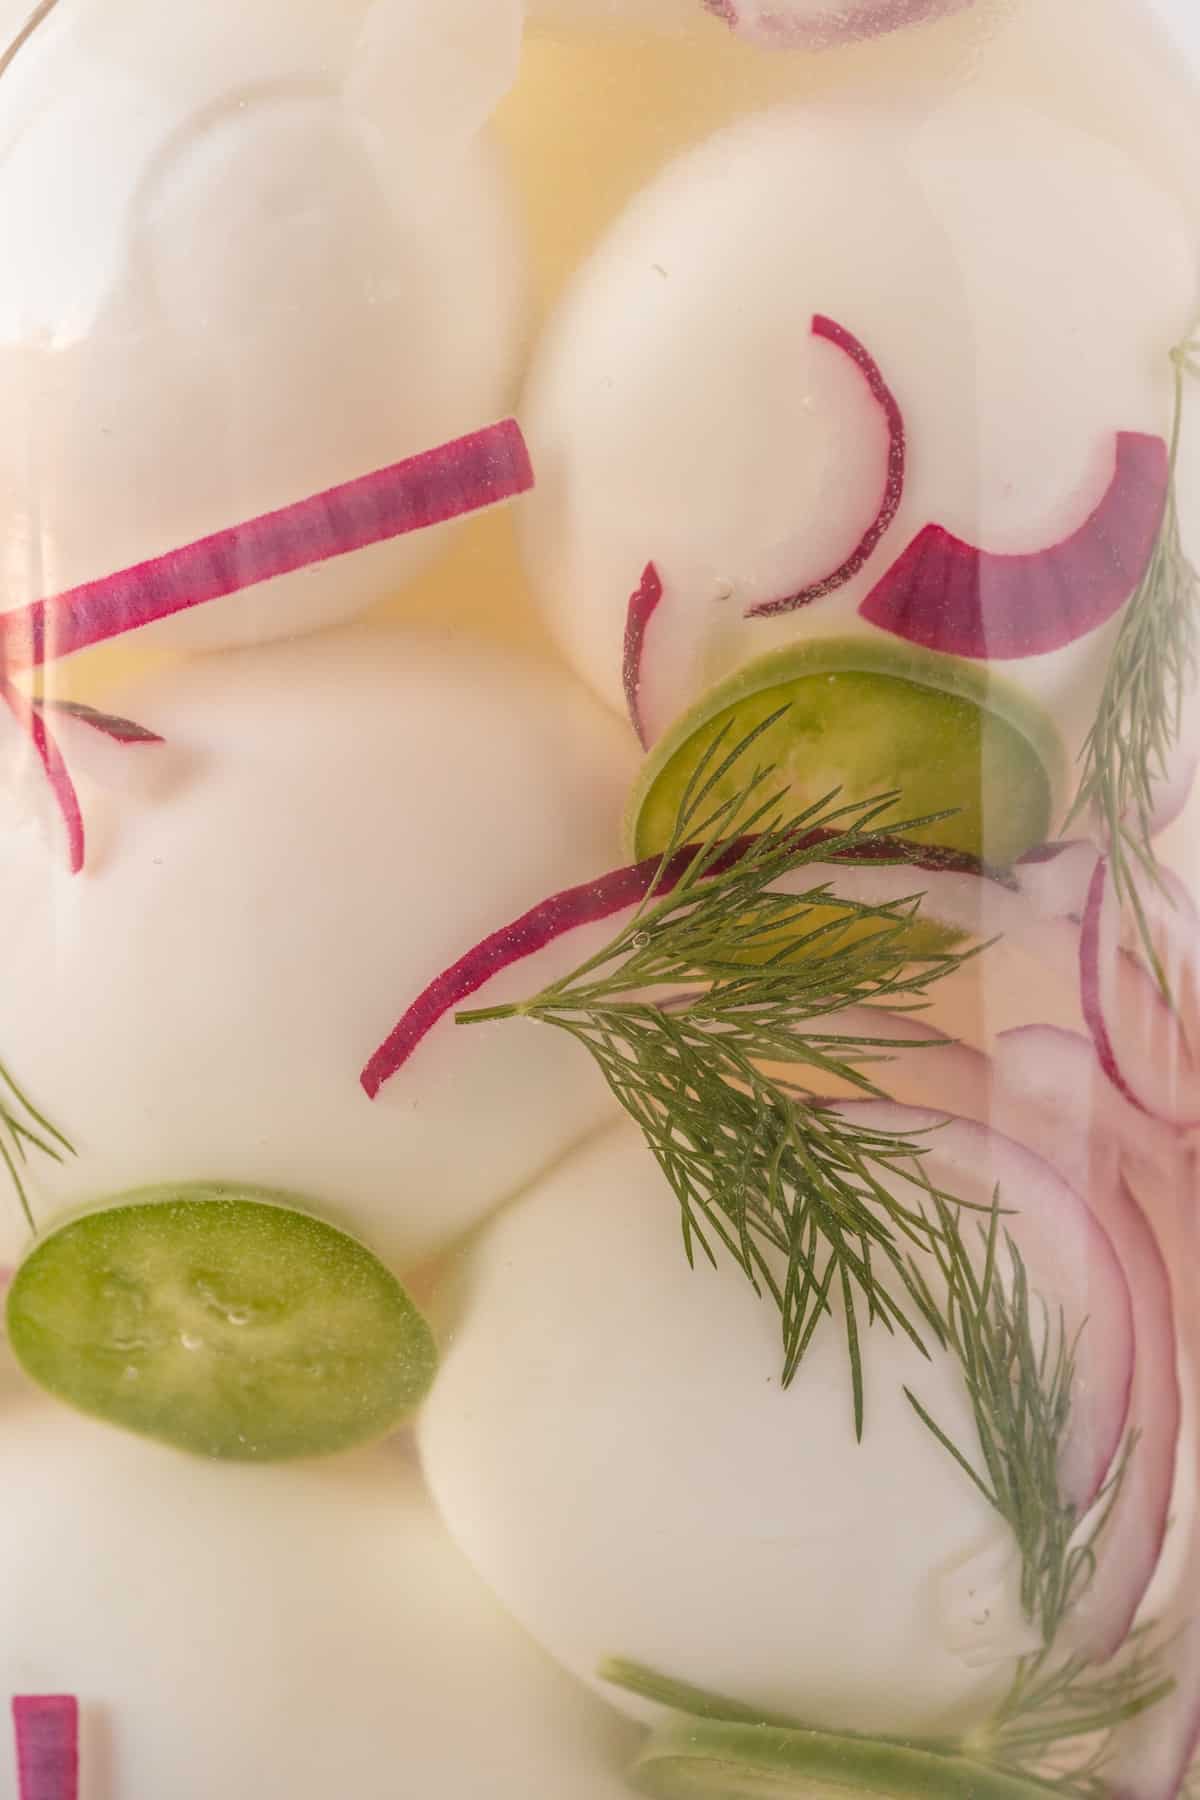 Pickled eggs in a jar with dill and chives.